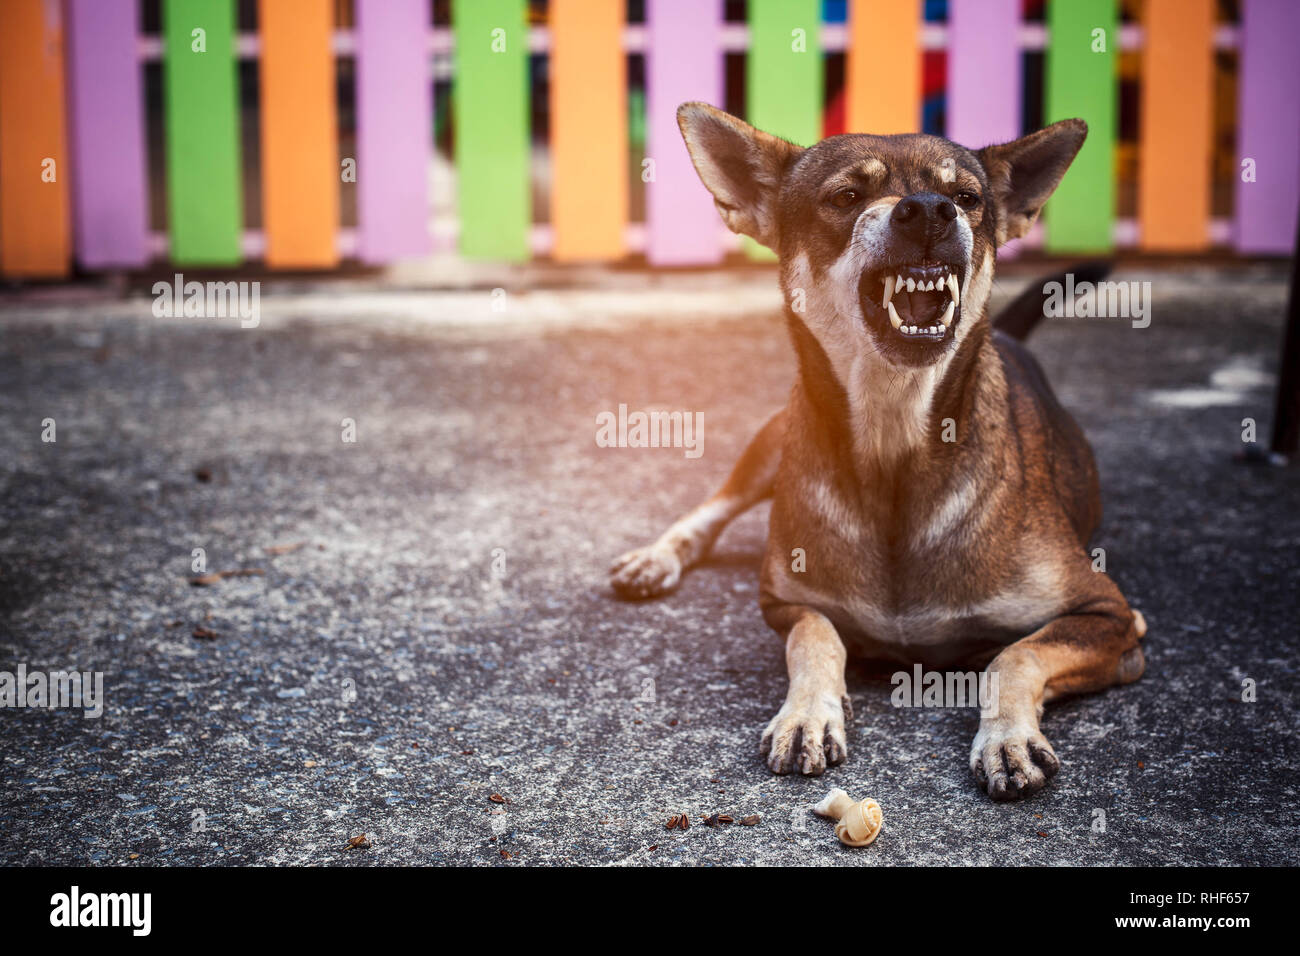 Angry Dog with food hungry Stock Photo